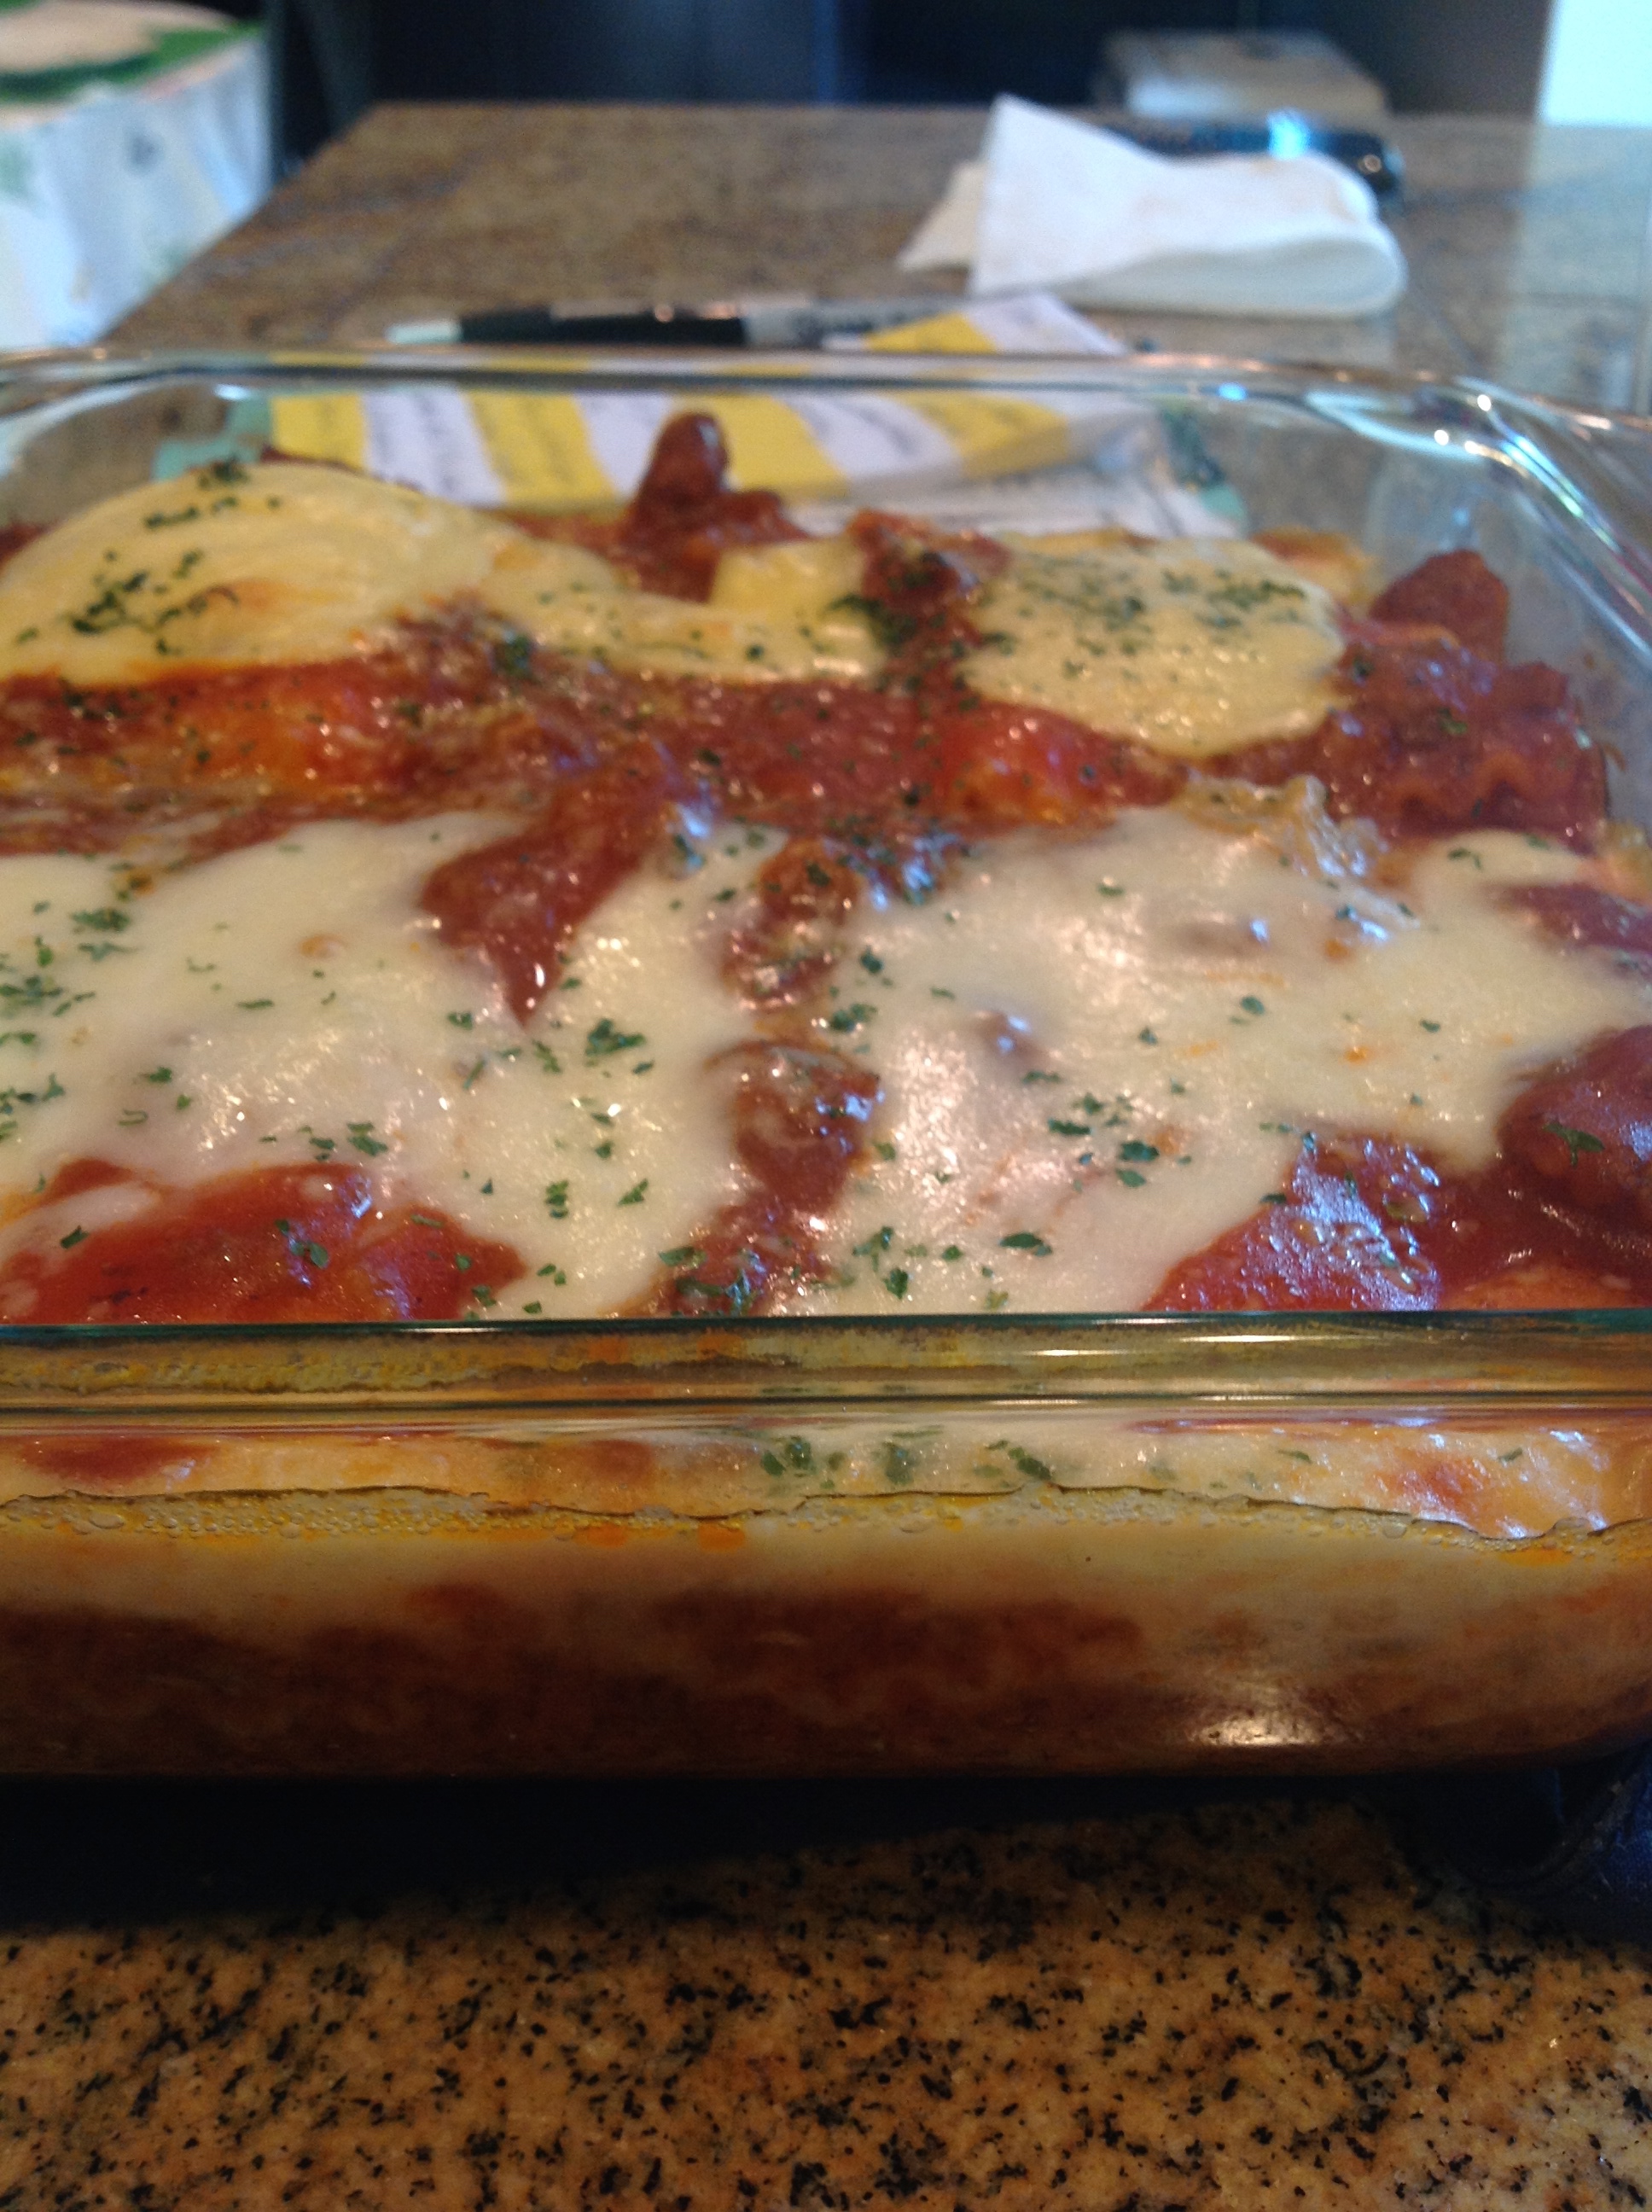 Lasagna (I used 2 kinds of cheese here)